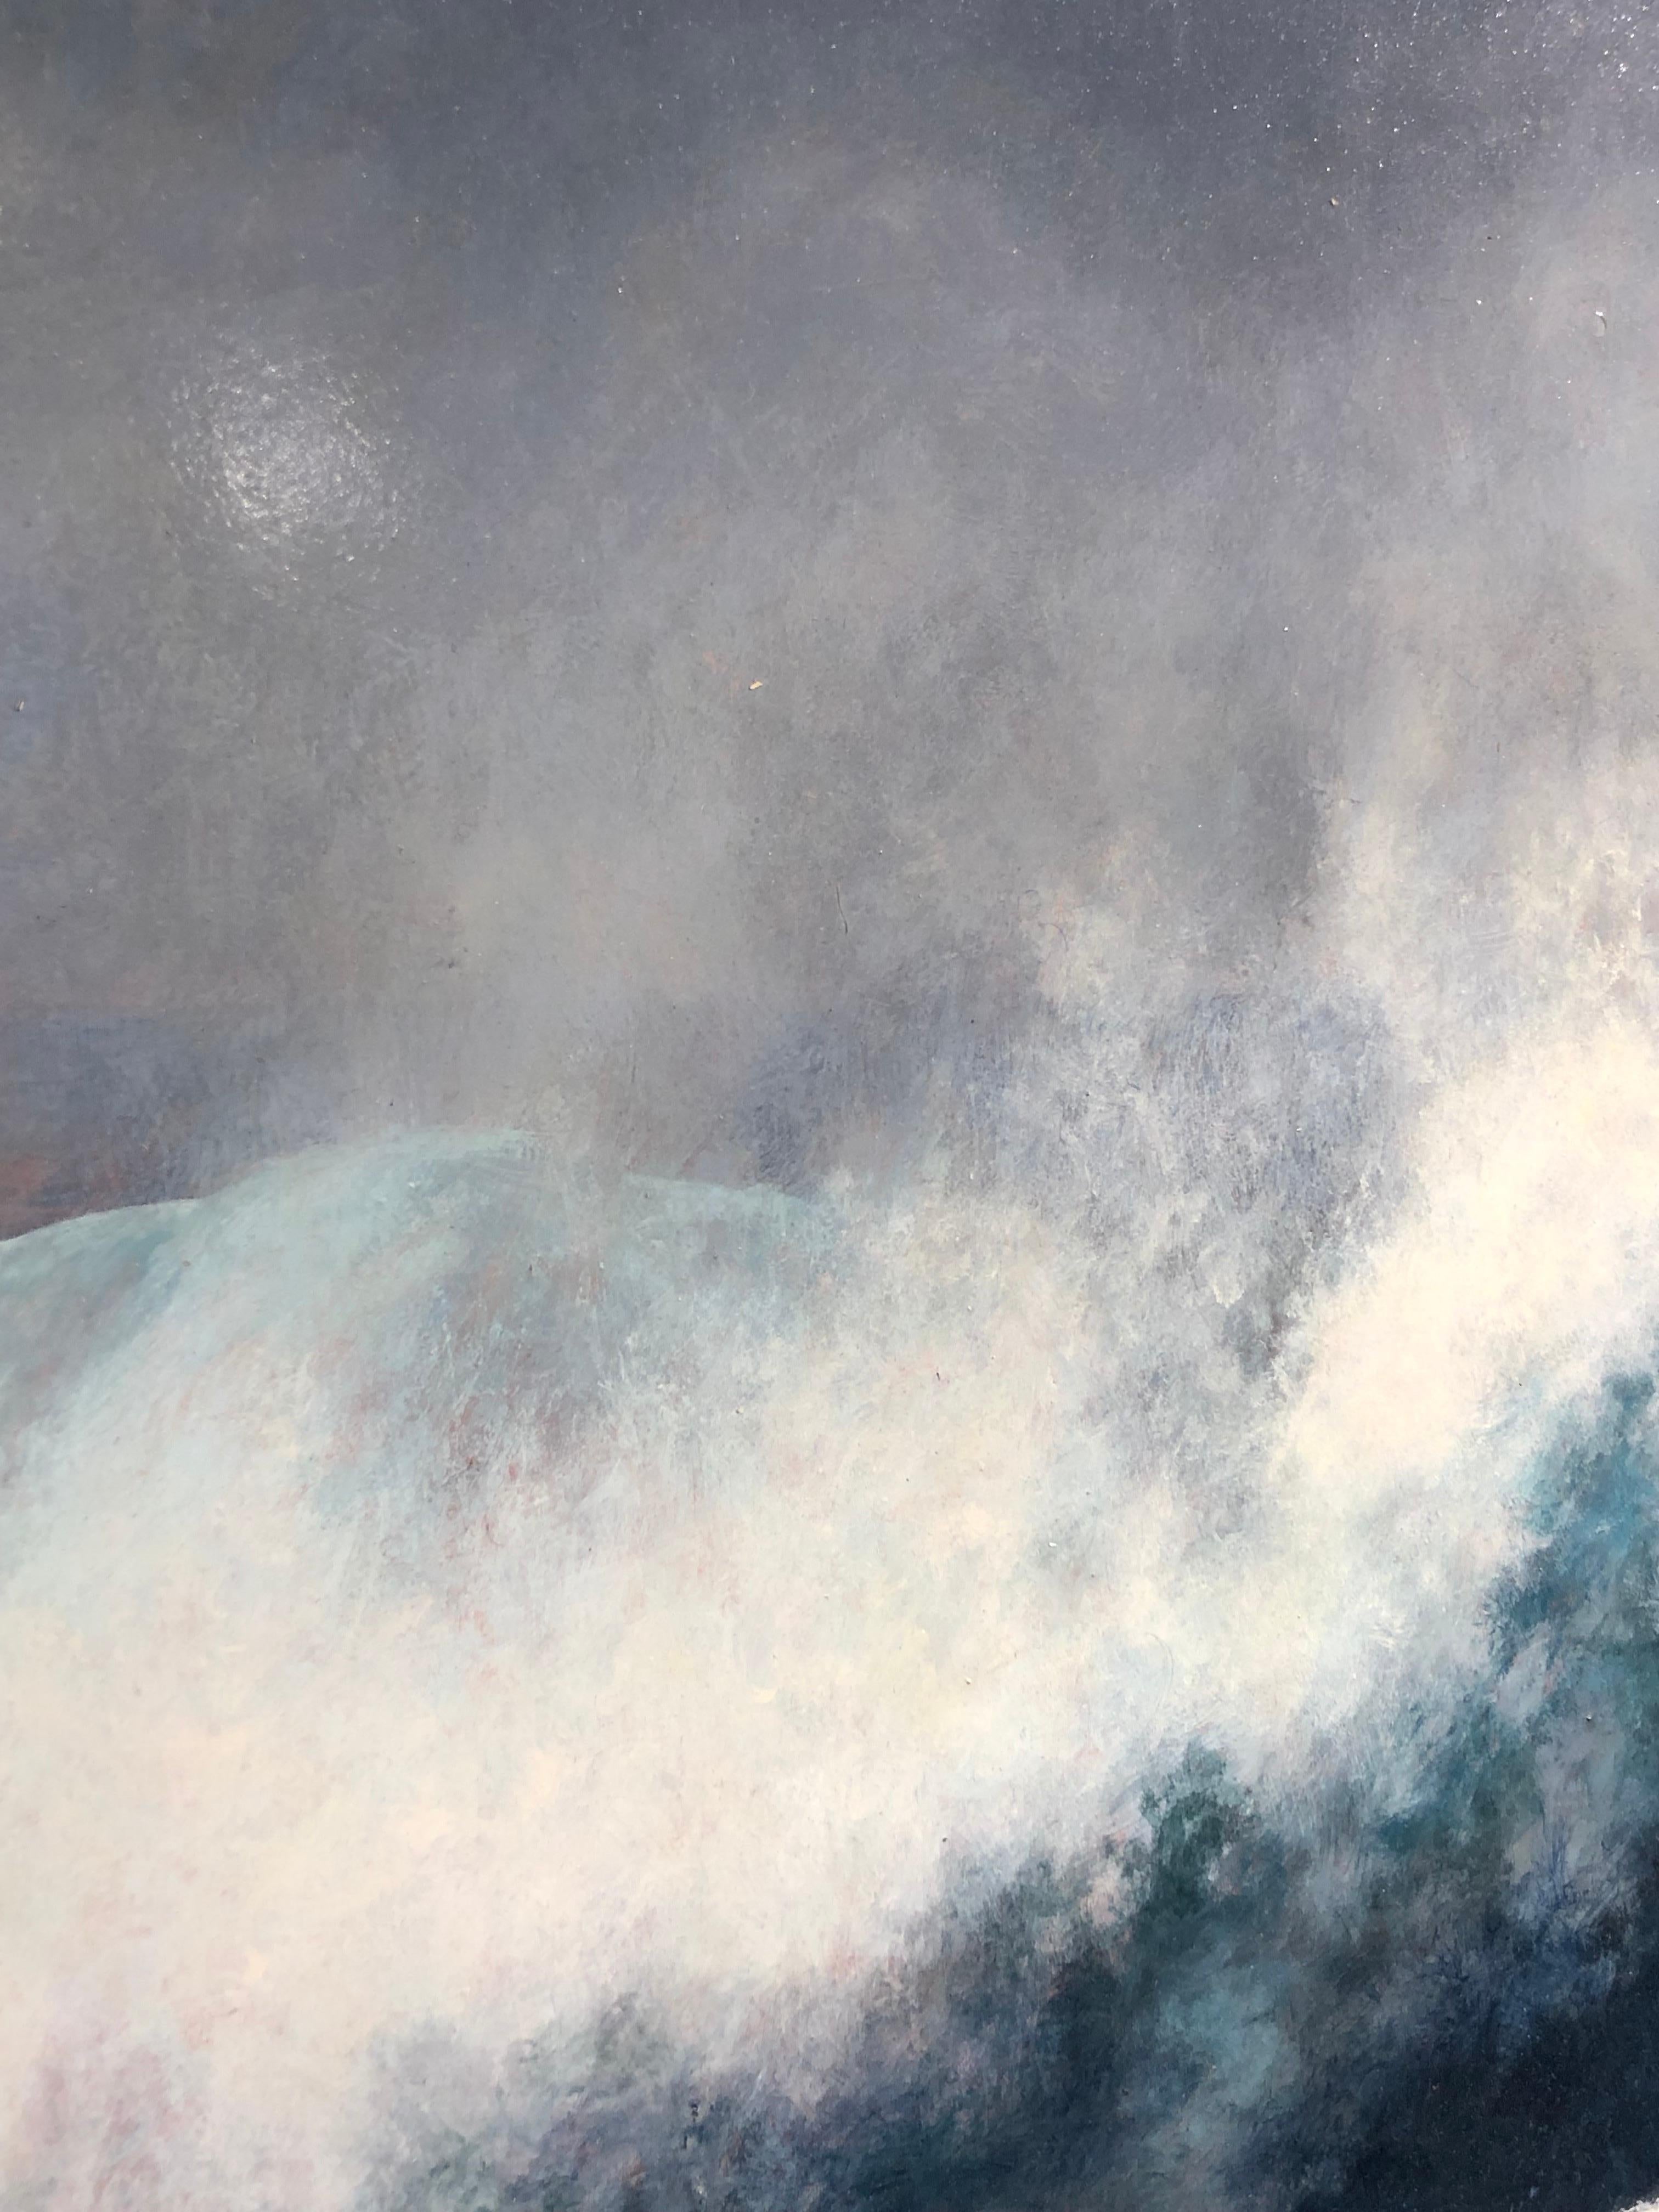 Wave, Kauai - Oil on Panel Painting in Blue Turquoise, White Sea Foam and Gray For Sale 8